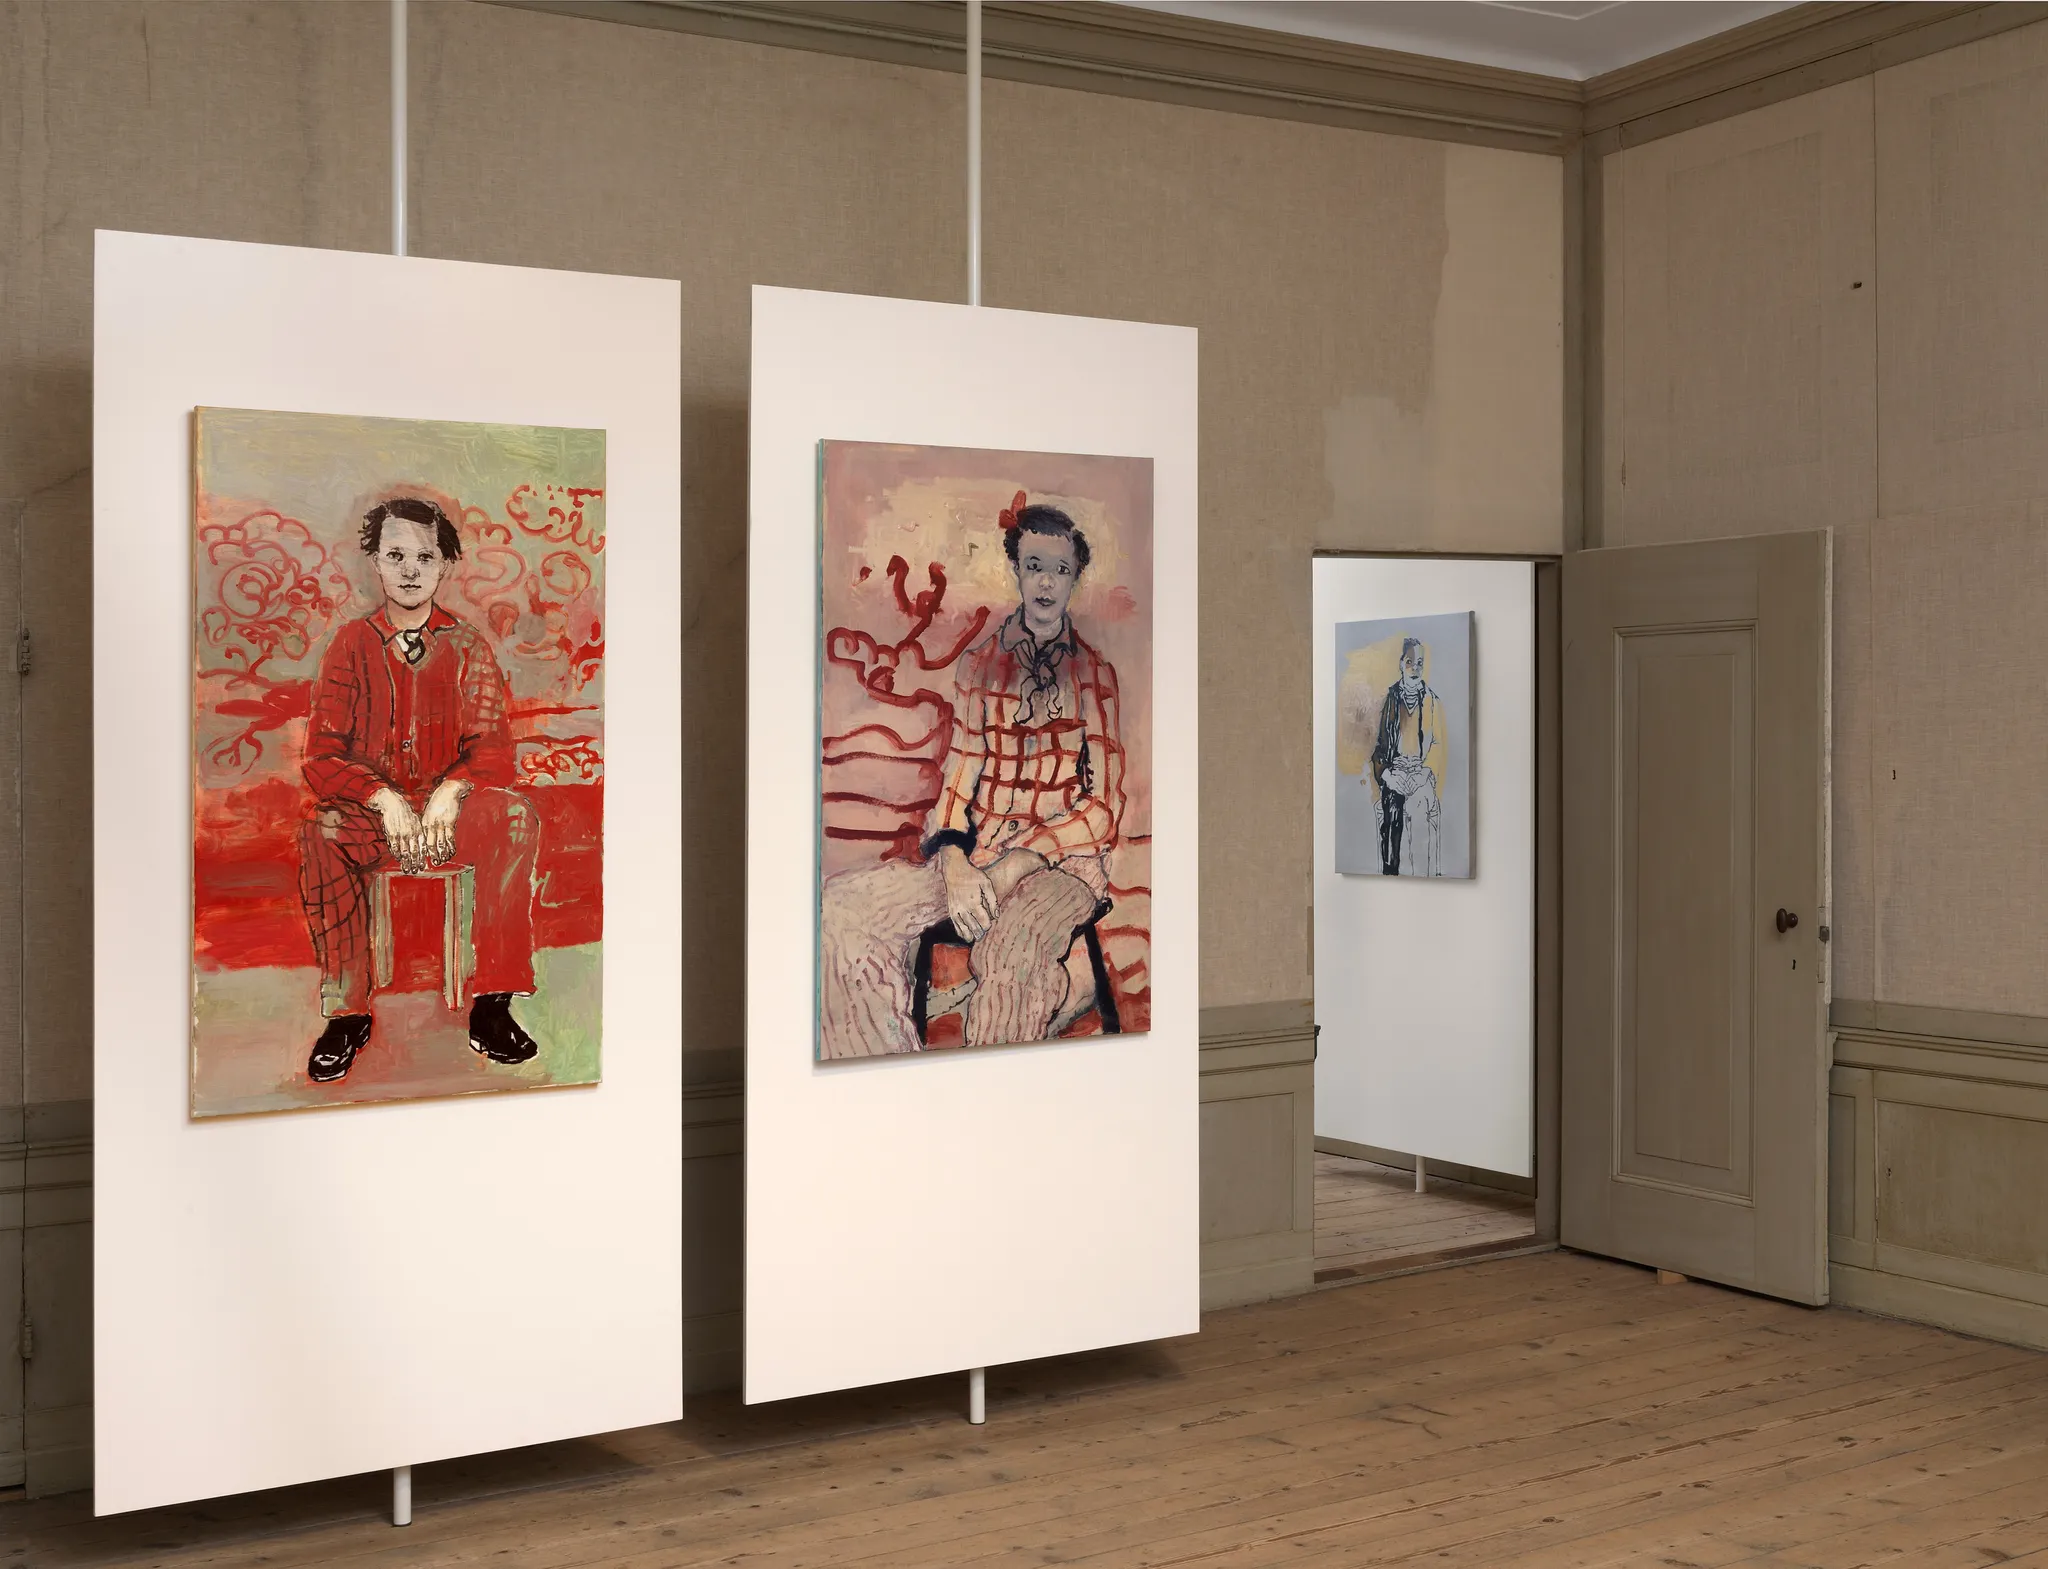 2 paintings depicting the portraits of a person sitting in red tones and, behind a door, a third painting of a person sitting in grey tones